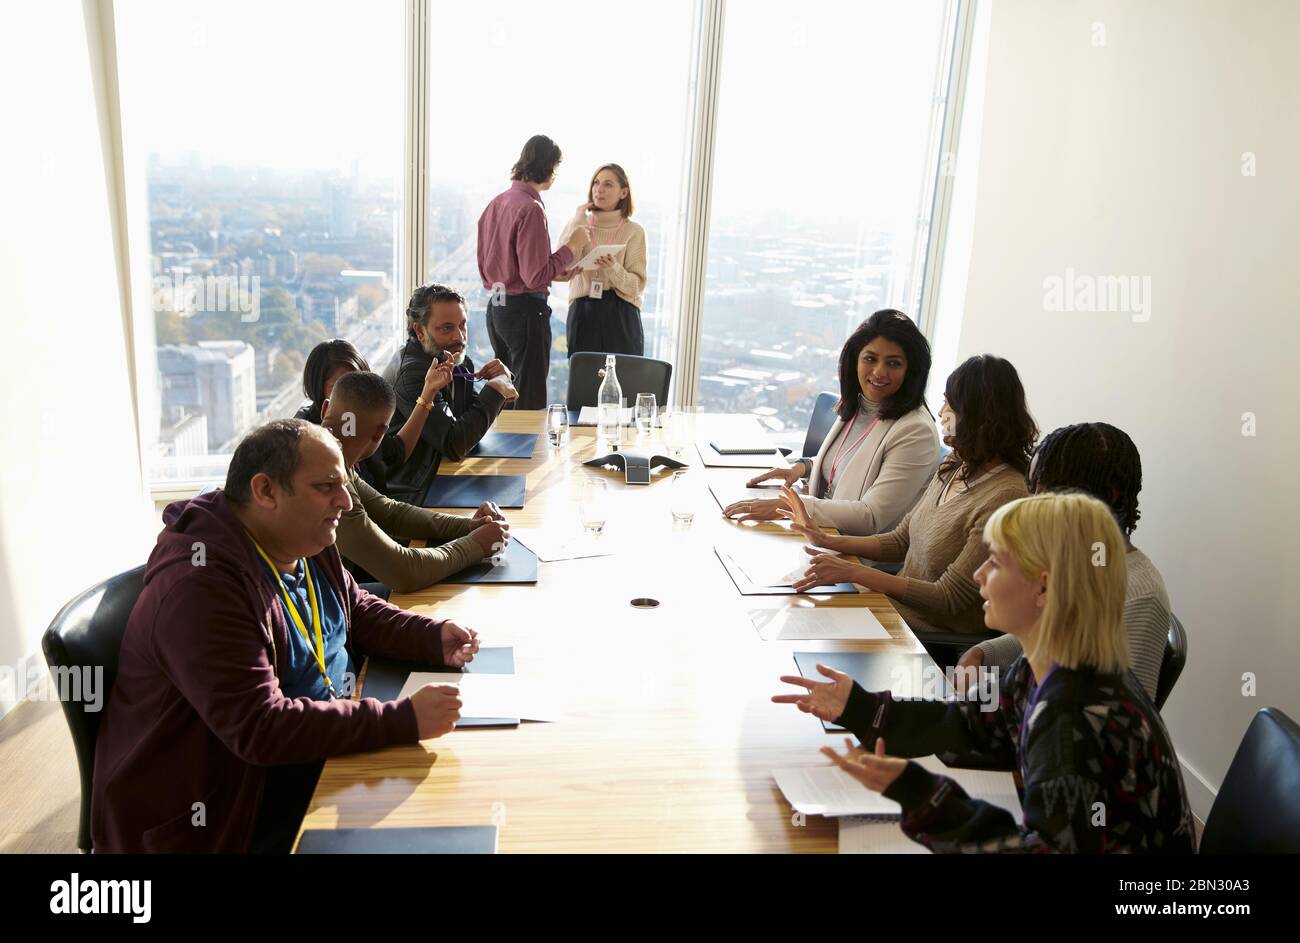 Business people talking in sunny conference room meeting Stock Photo